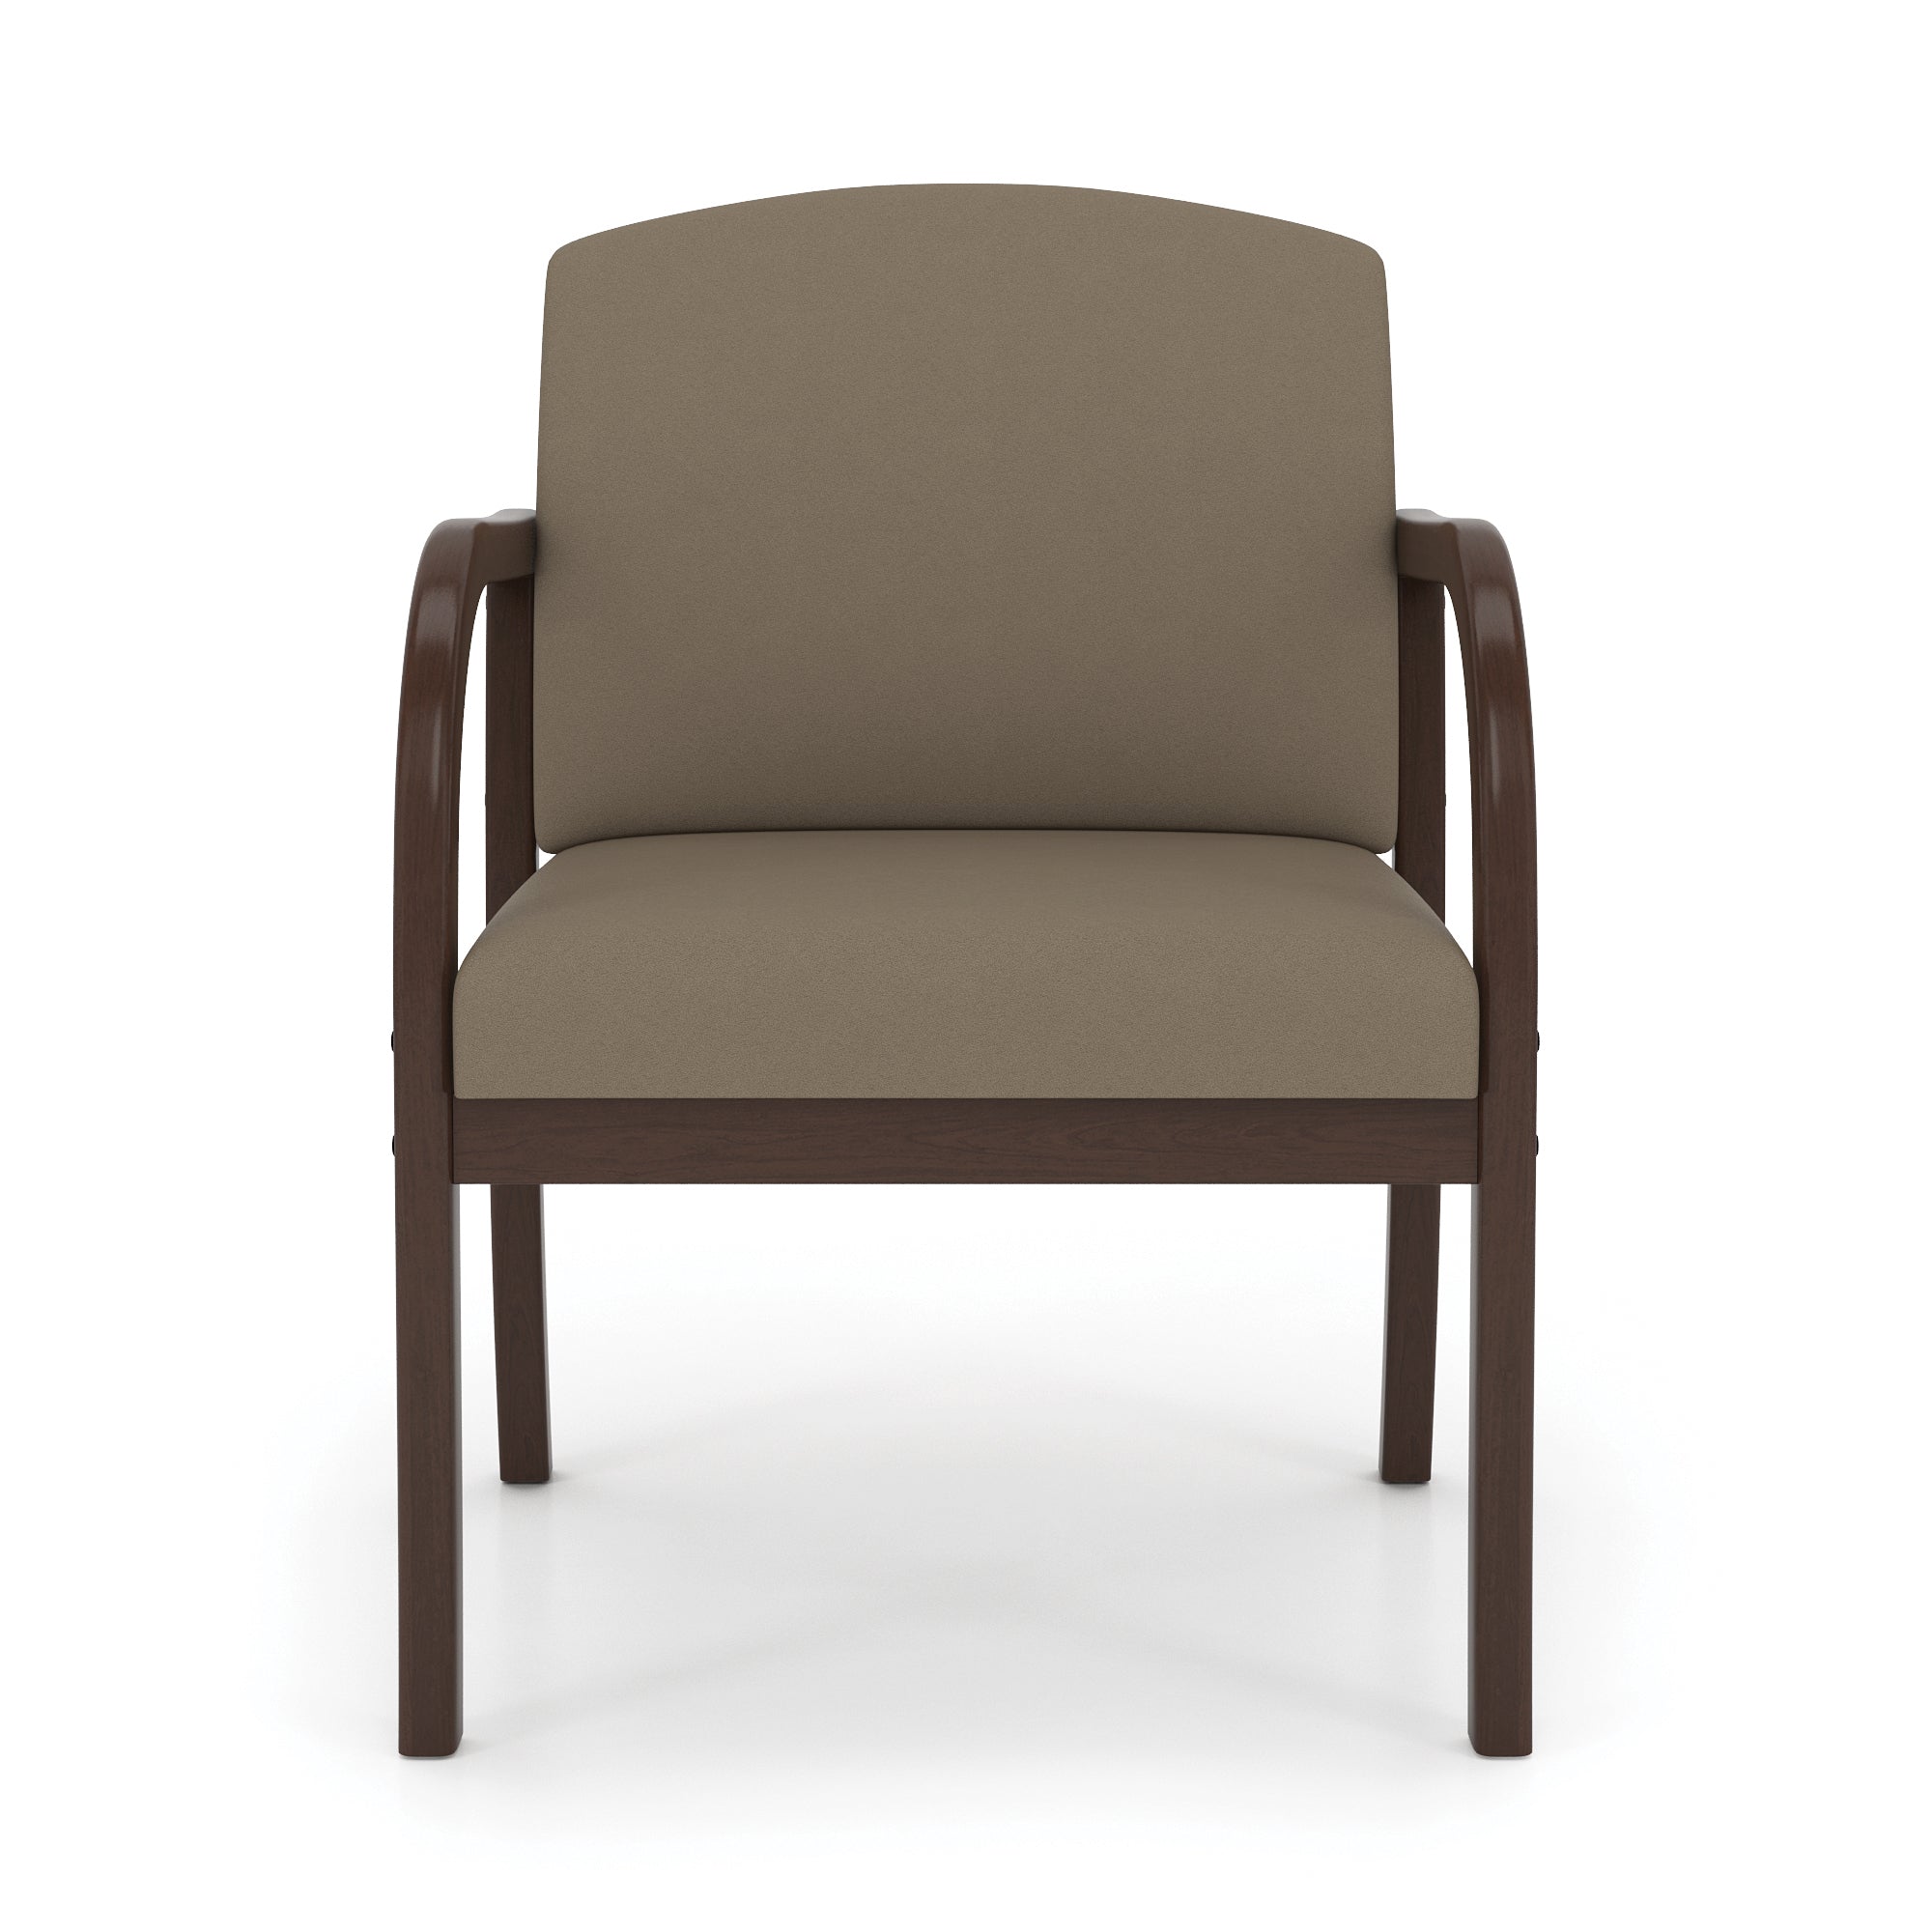 Lesro Weston Oversize Guest Chair with arms 400lb capacity